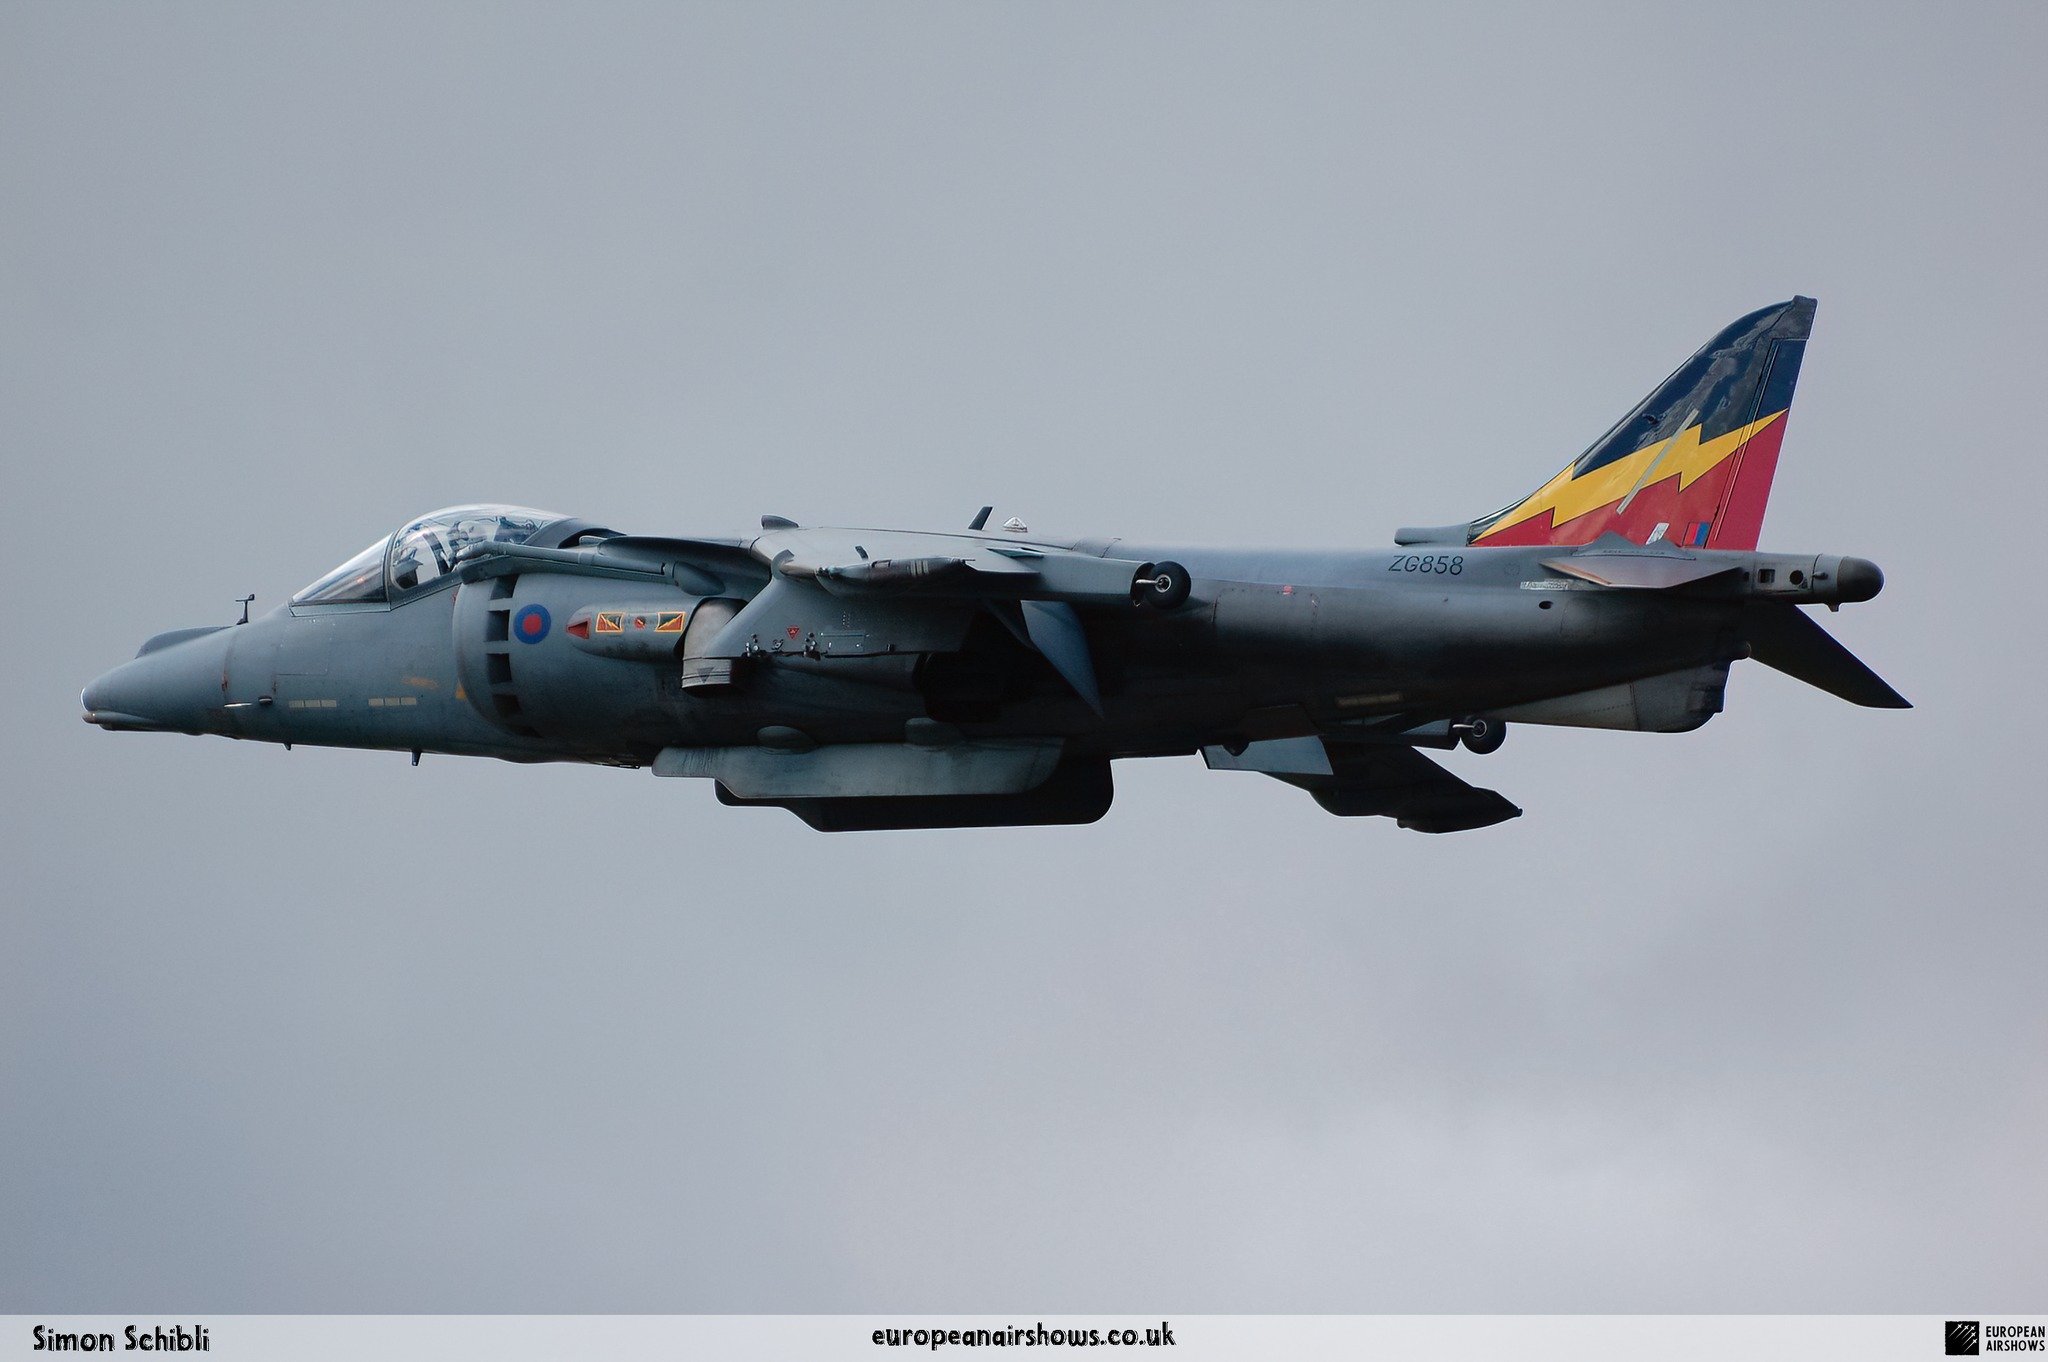 #OTD Apr. 30, 1985 - British Aerospace Harrier II performed its first flight. 

The British Aerospace/McDonnell Douglas Harrier II is a second-generation vertical/short takeoff and landing (V/STOL) jet aircraft used previously by the UK's Royal Air F